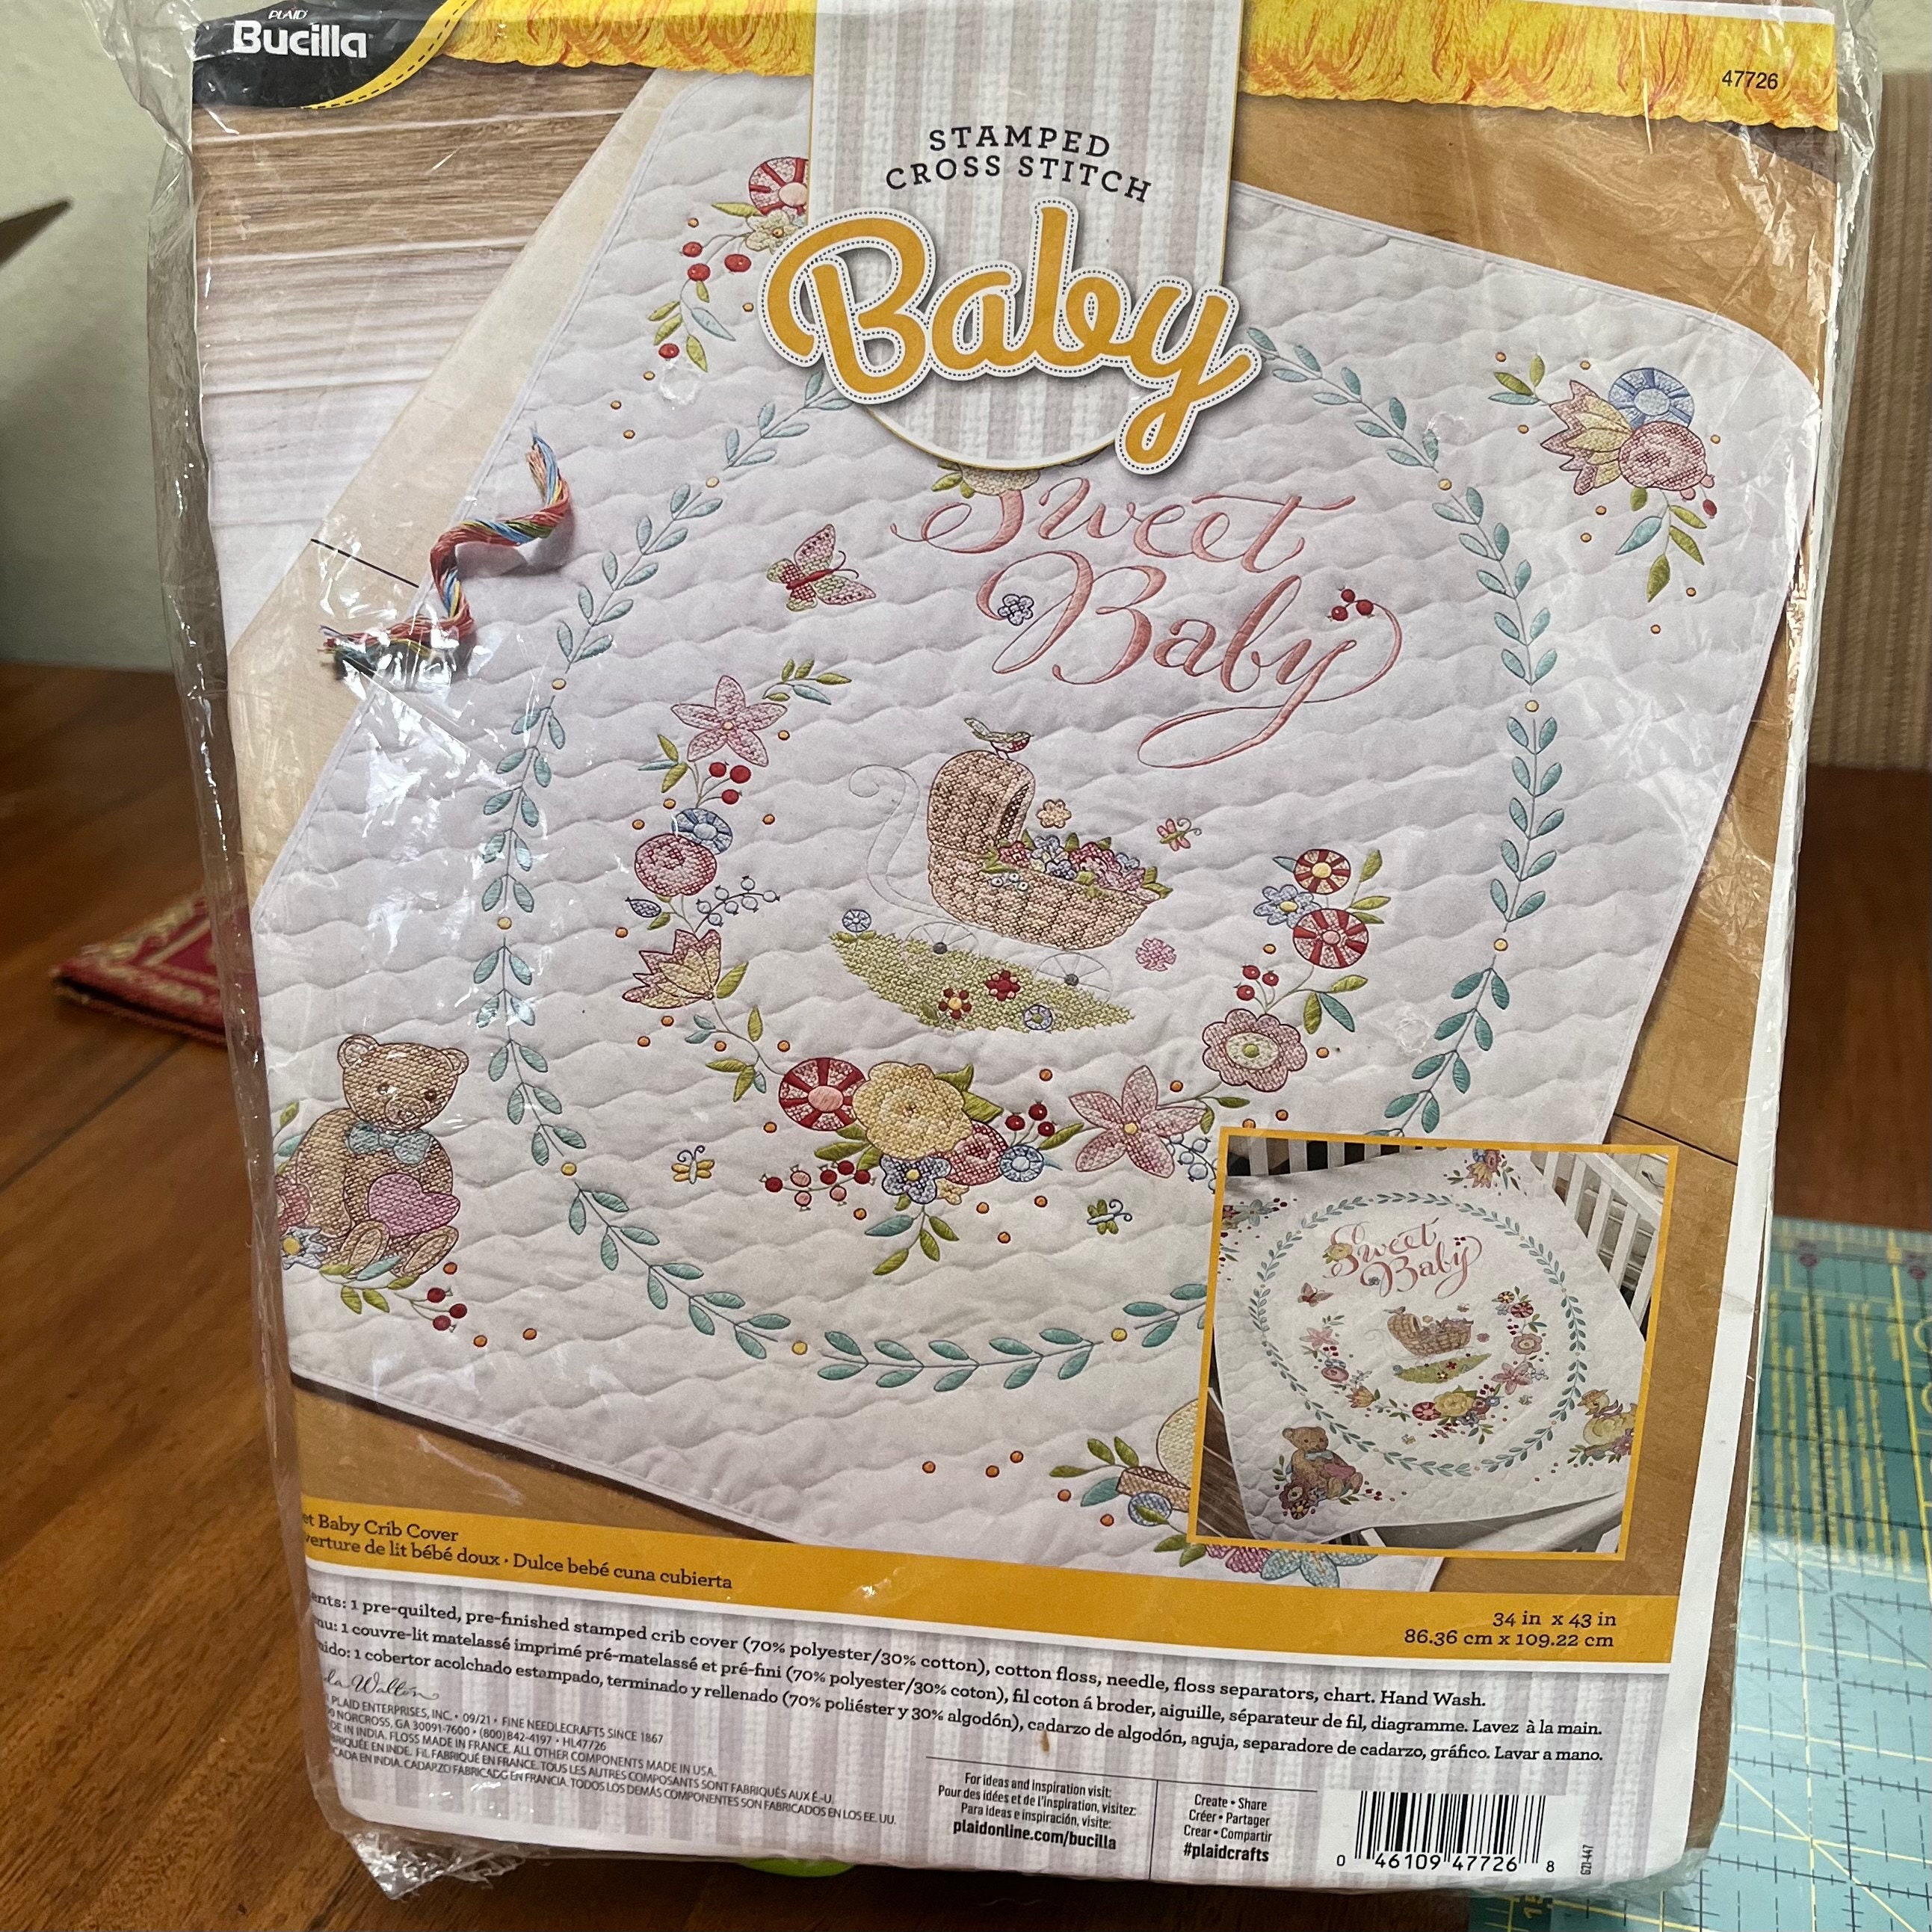 Bucilla Sweet Baby Crib Cover Baby Quilt Stamped Cross Stitch Kit